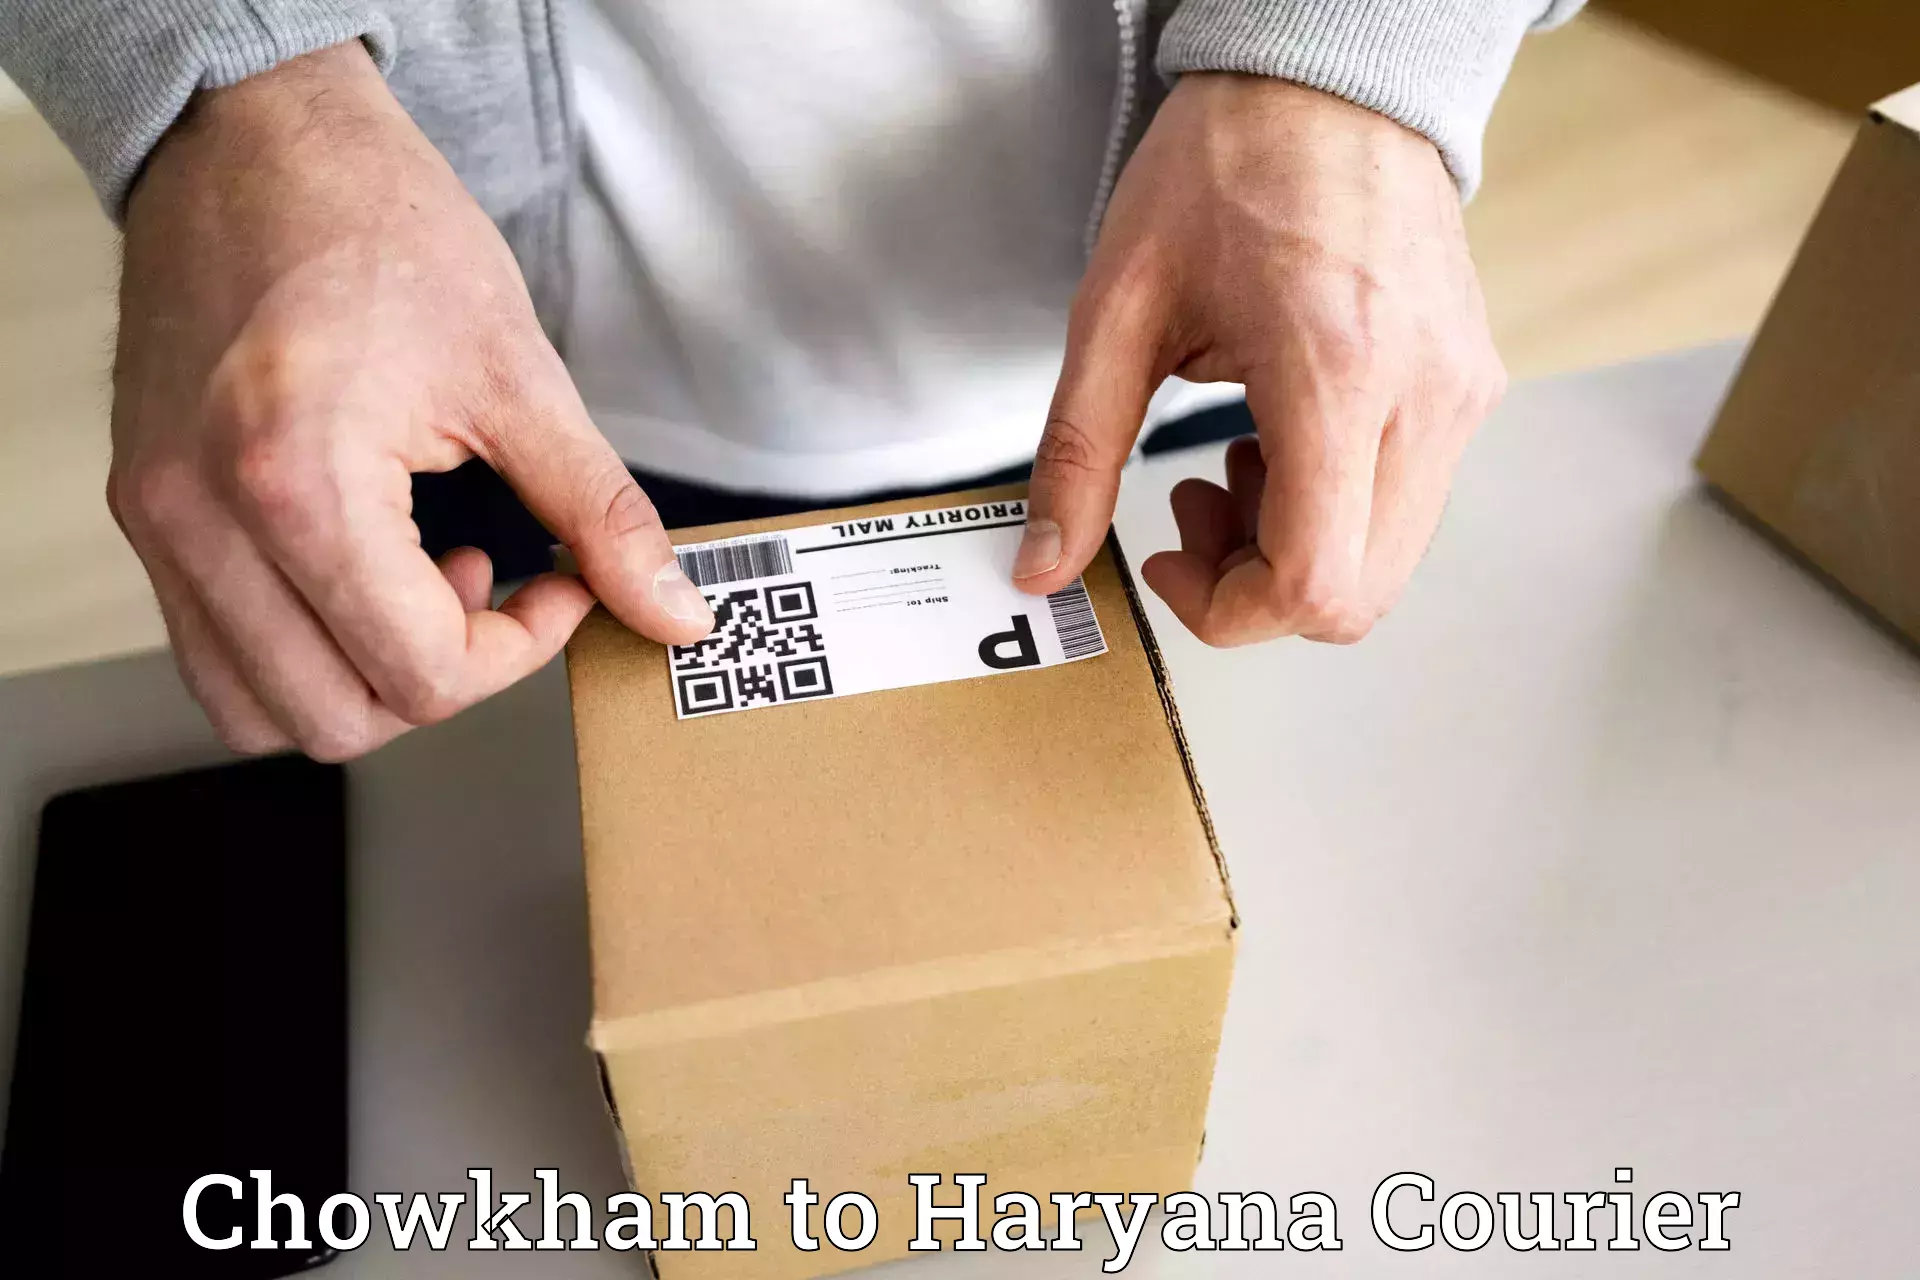 Express package services Chowkham to Gurgaon